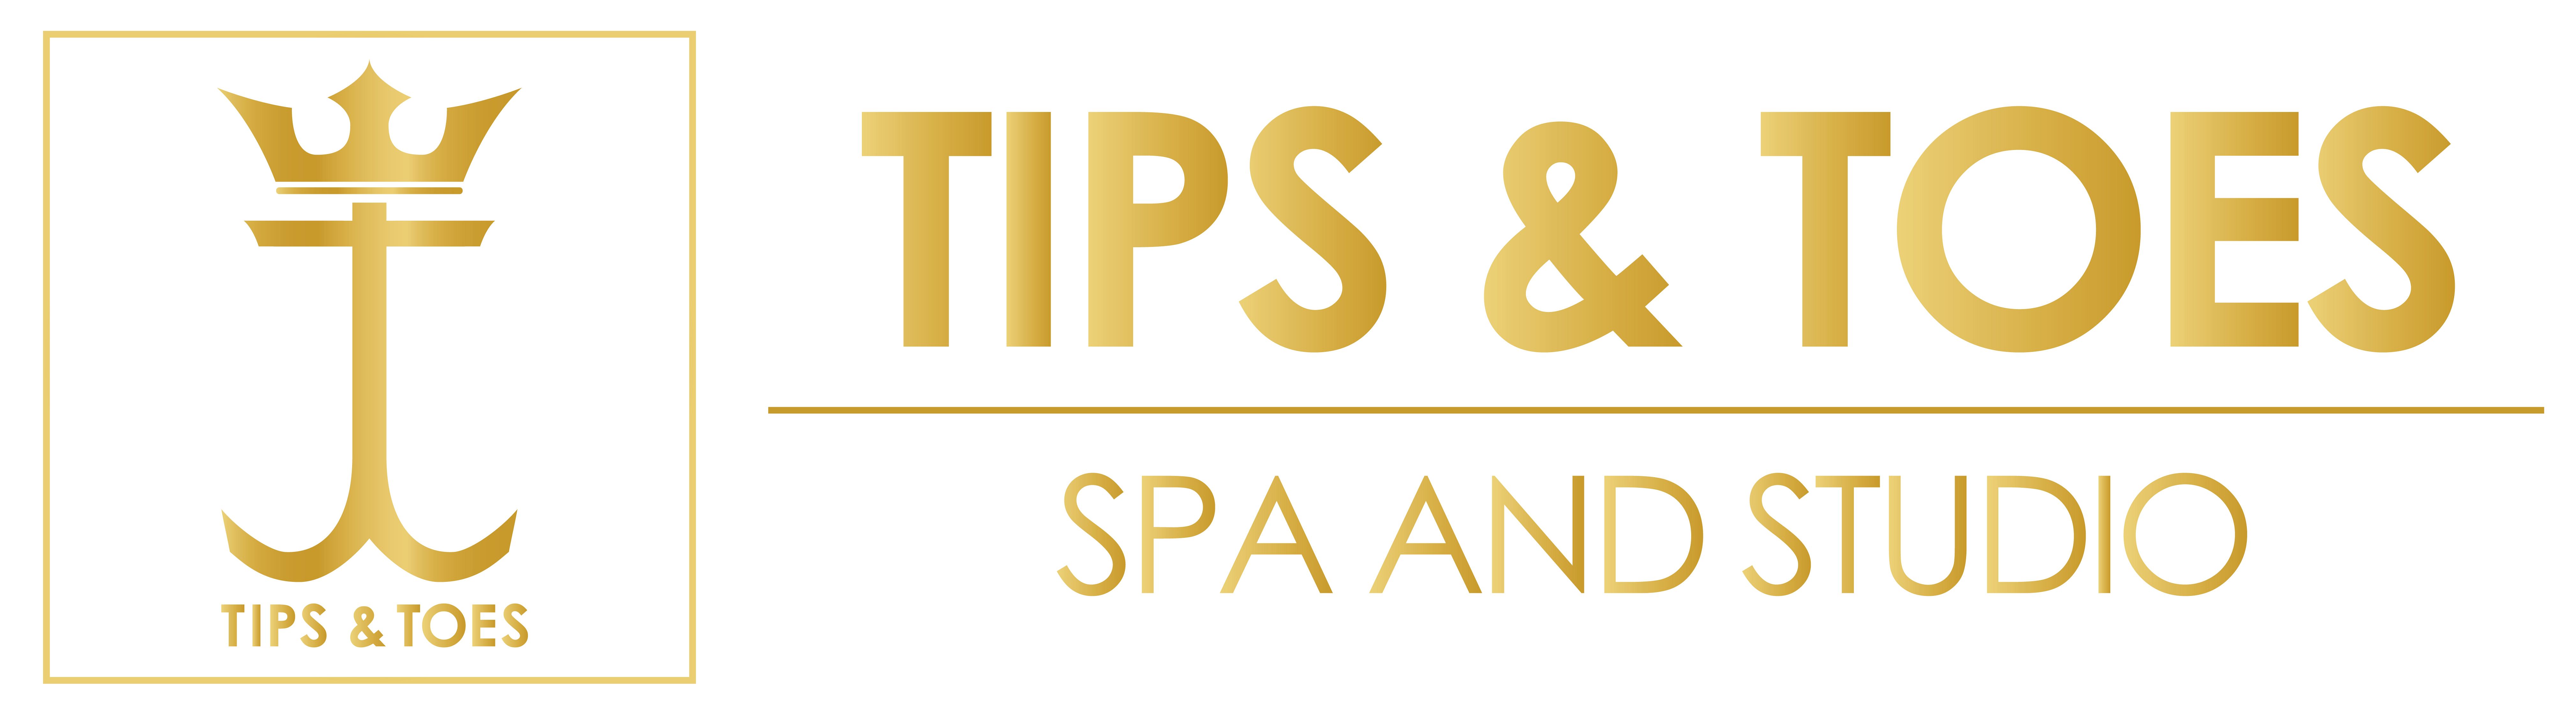 Tips and Toes Spa & Studio